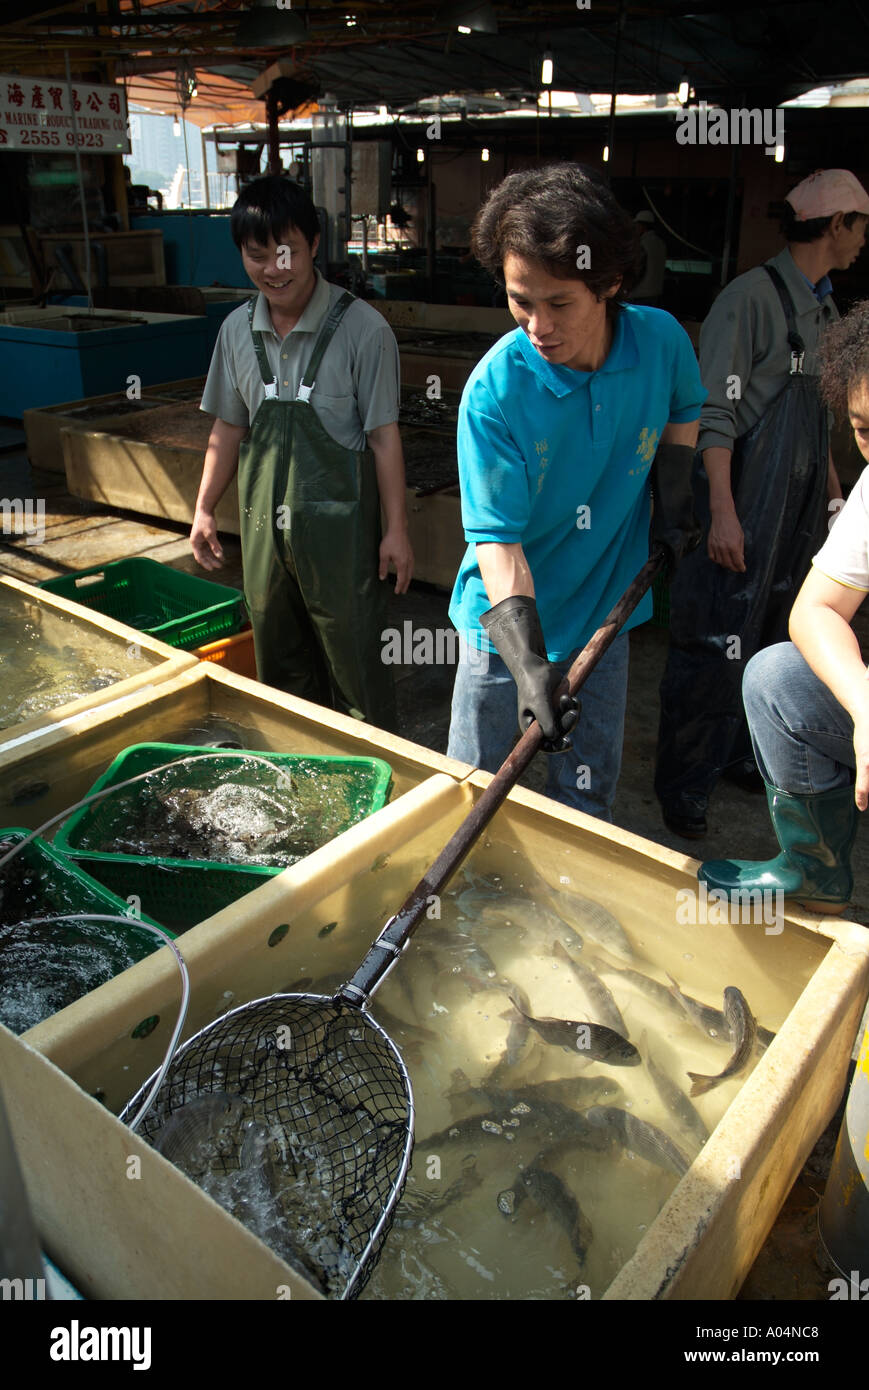 dh Fish market worker ABERDEEN HONG KONG Chinese fishmonger with net selecting fresh fish from water tanks old china Stock Photo